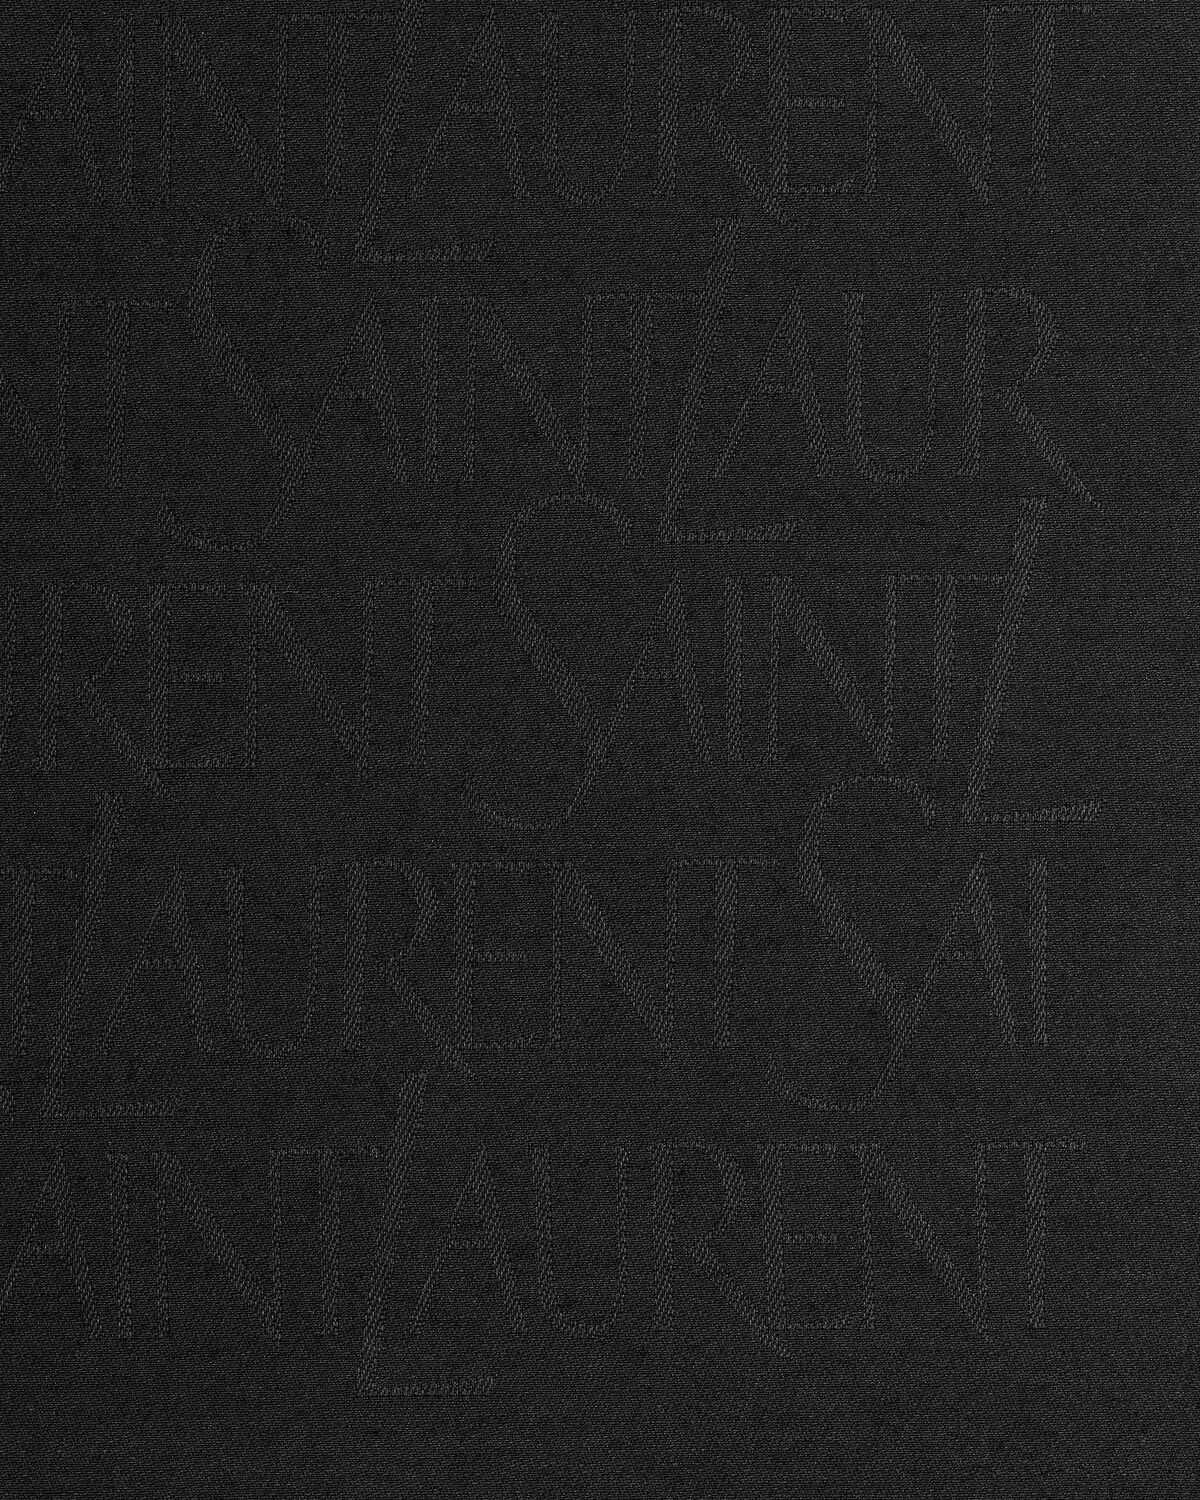 SAINT LAURENT large square scarf in silk and wool jacquard